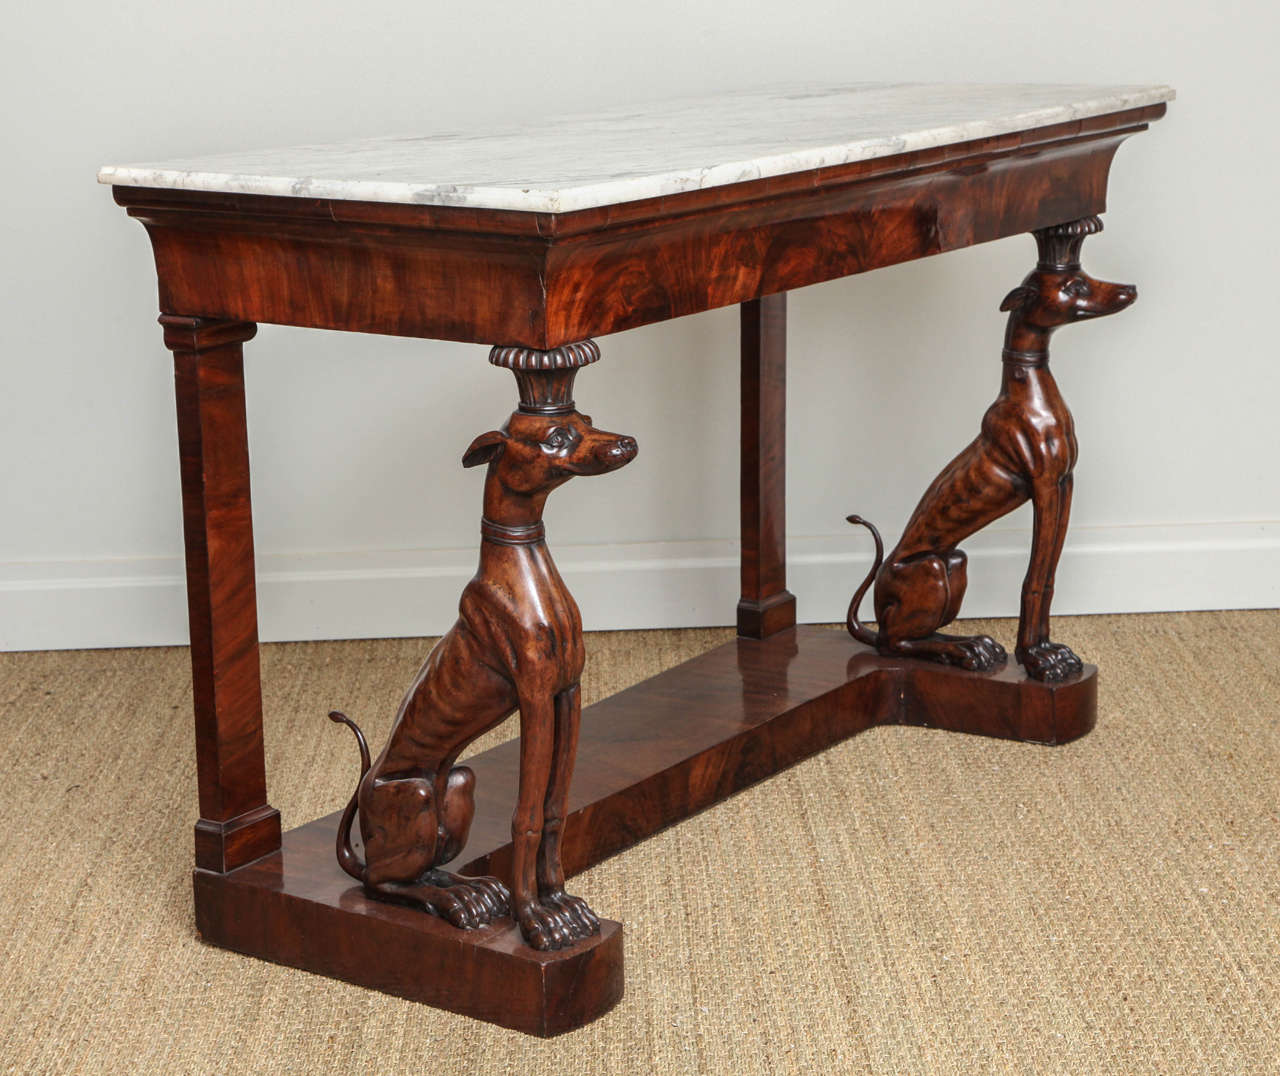 An impressive Italian marble-top mahogany console table, the original Carrara marble top with cove edge over molded crotch grained frieze, supported by finely carved and whimsical whippet supports on a shaped plinth base, the whole with good patina